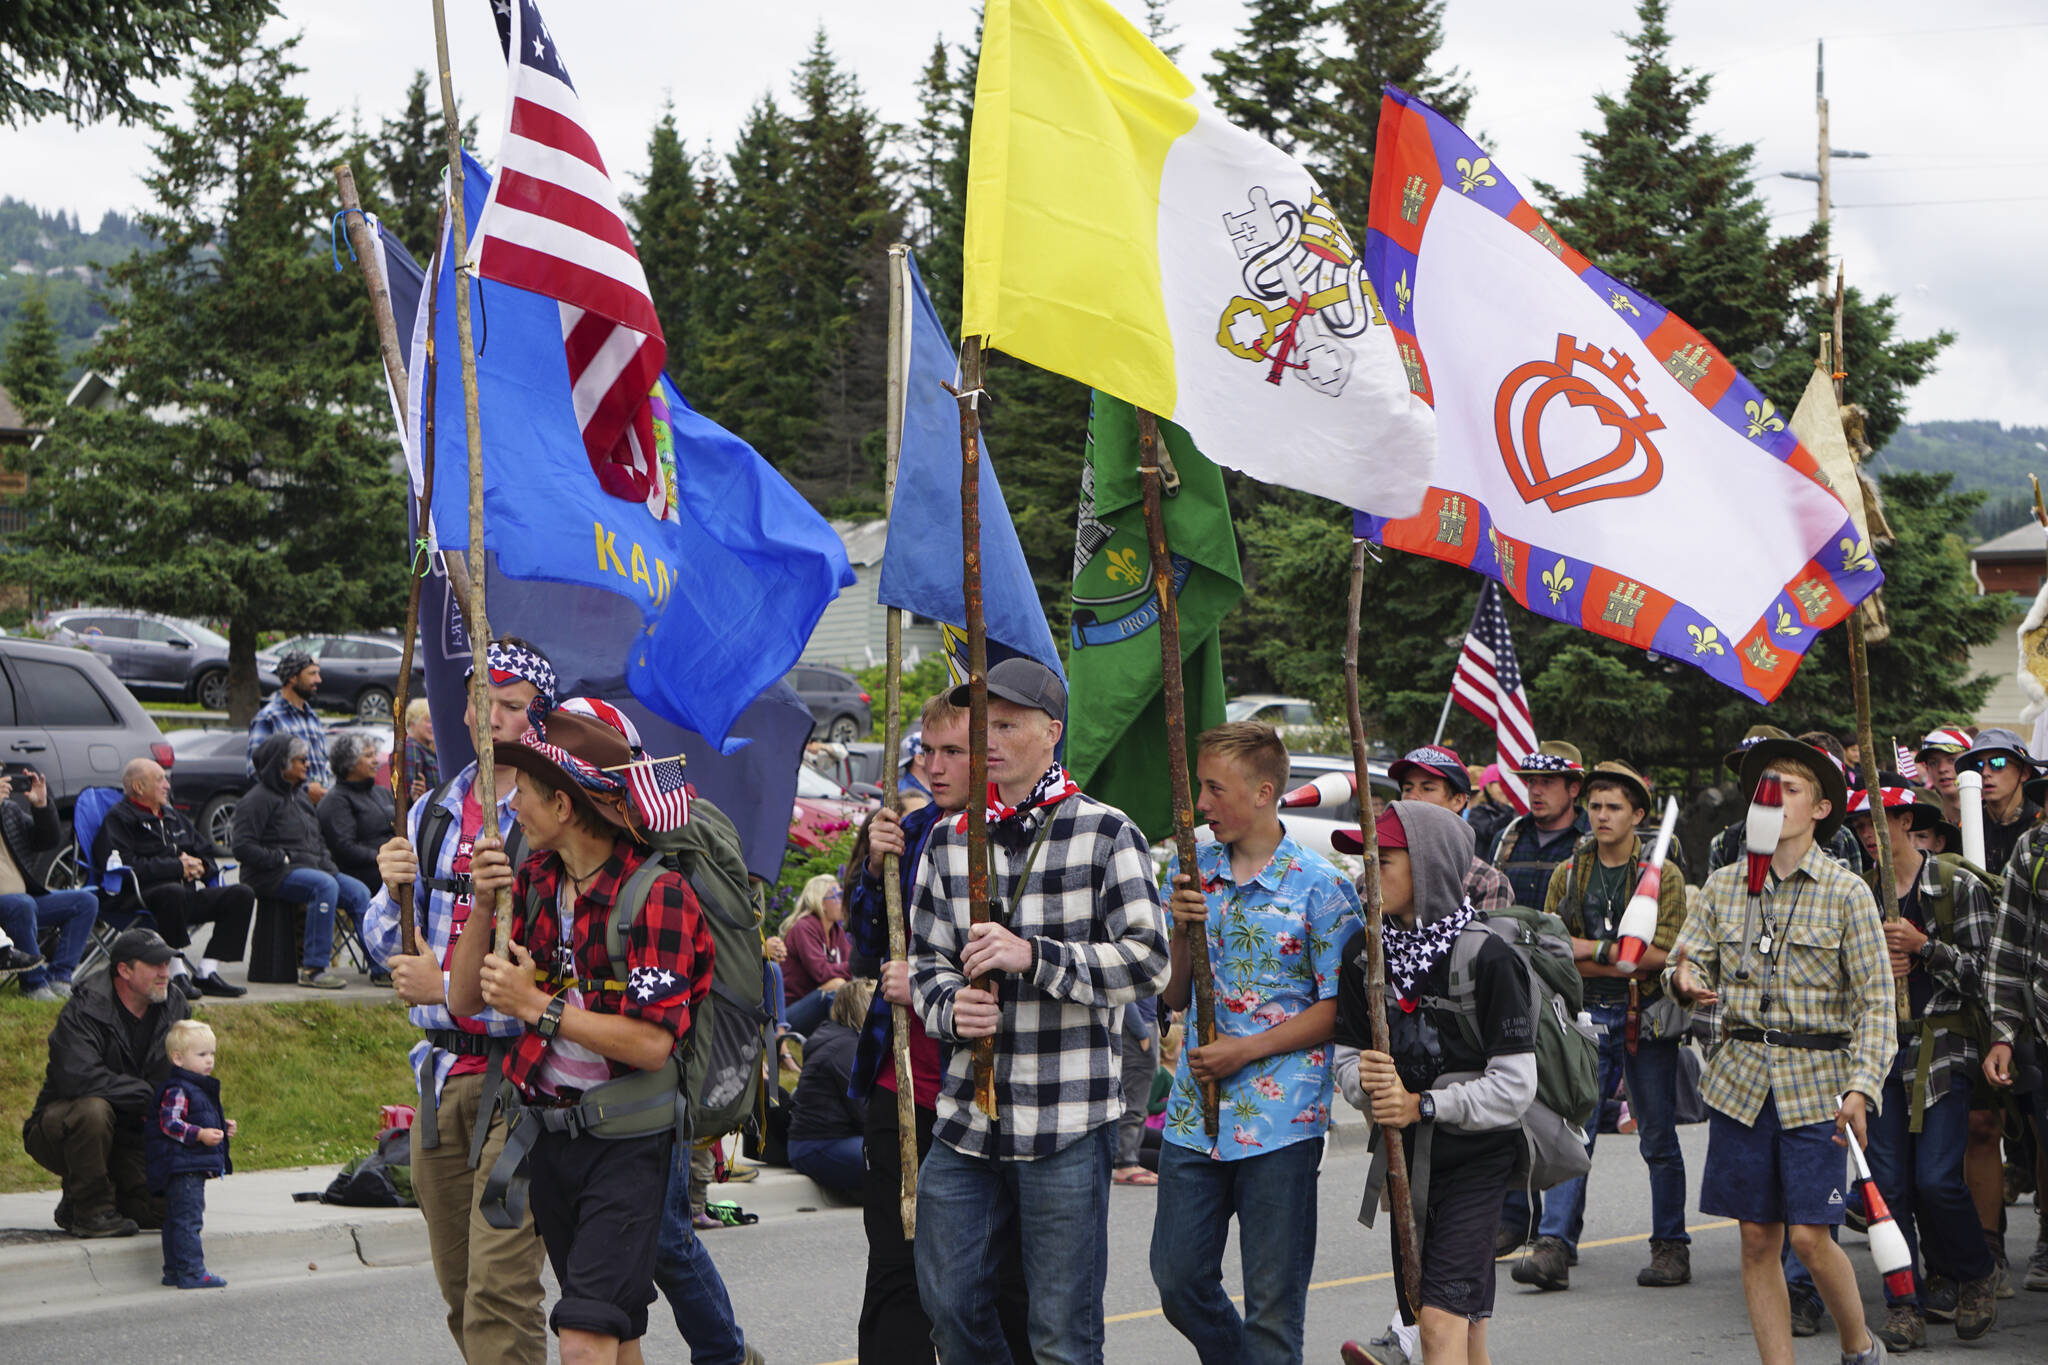 Young men from St. Mary’s Academy, St. Mary’s, Kansas, and members of the Knights of Immaculata, march in the Homer Fourth of July parade on Monday, July 4, 2022, on Pioneer Avenue in Homer, Alaska. The group of about 50 men and boys camped in Homer as part of their trip. The group won Best in Show for the parade. (Photo by Michael Armstrong/Homer News)